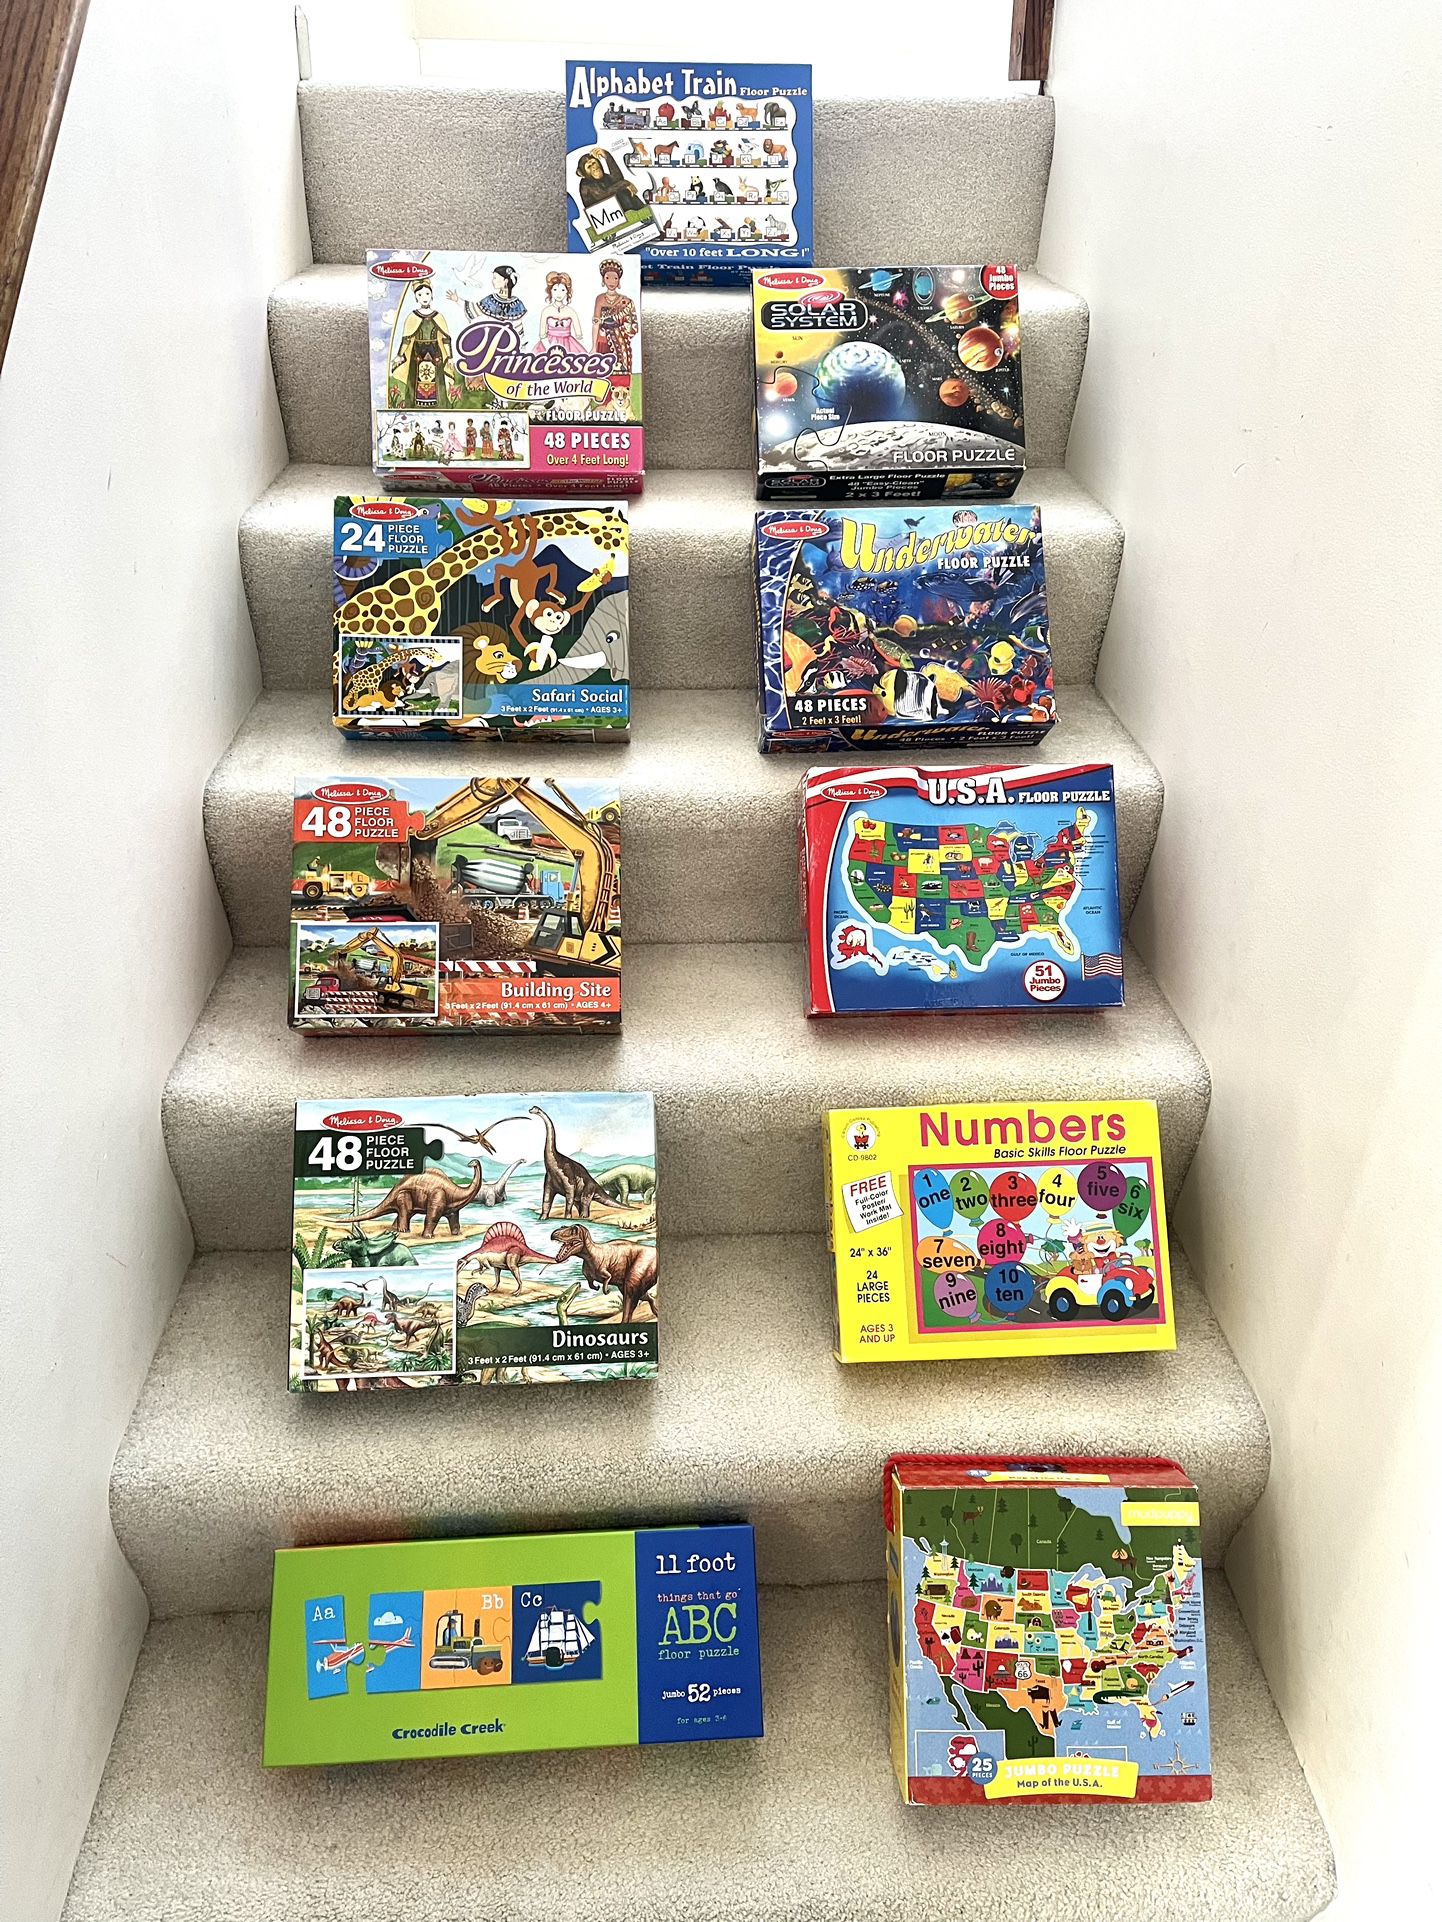 Kids Floor Puzzles. Melissa & Doug $8 Each Or $6 Each All Others. Get Them All For $65. 